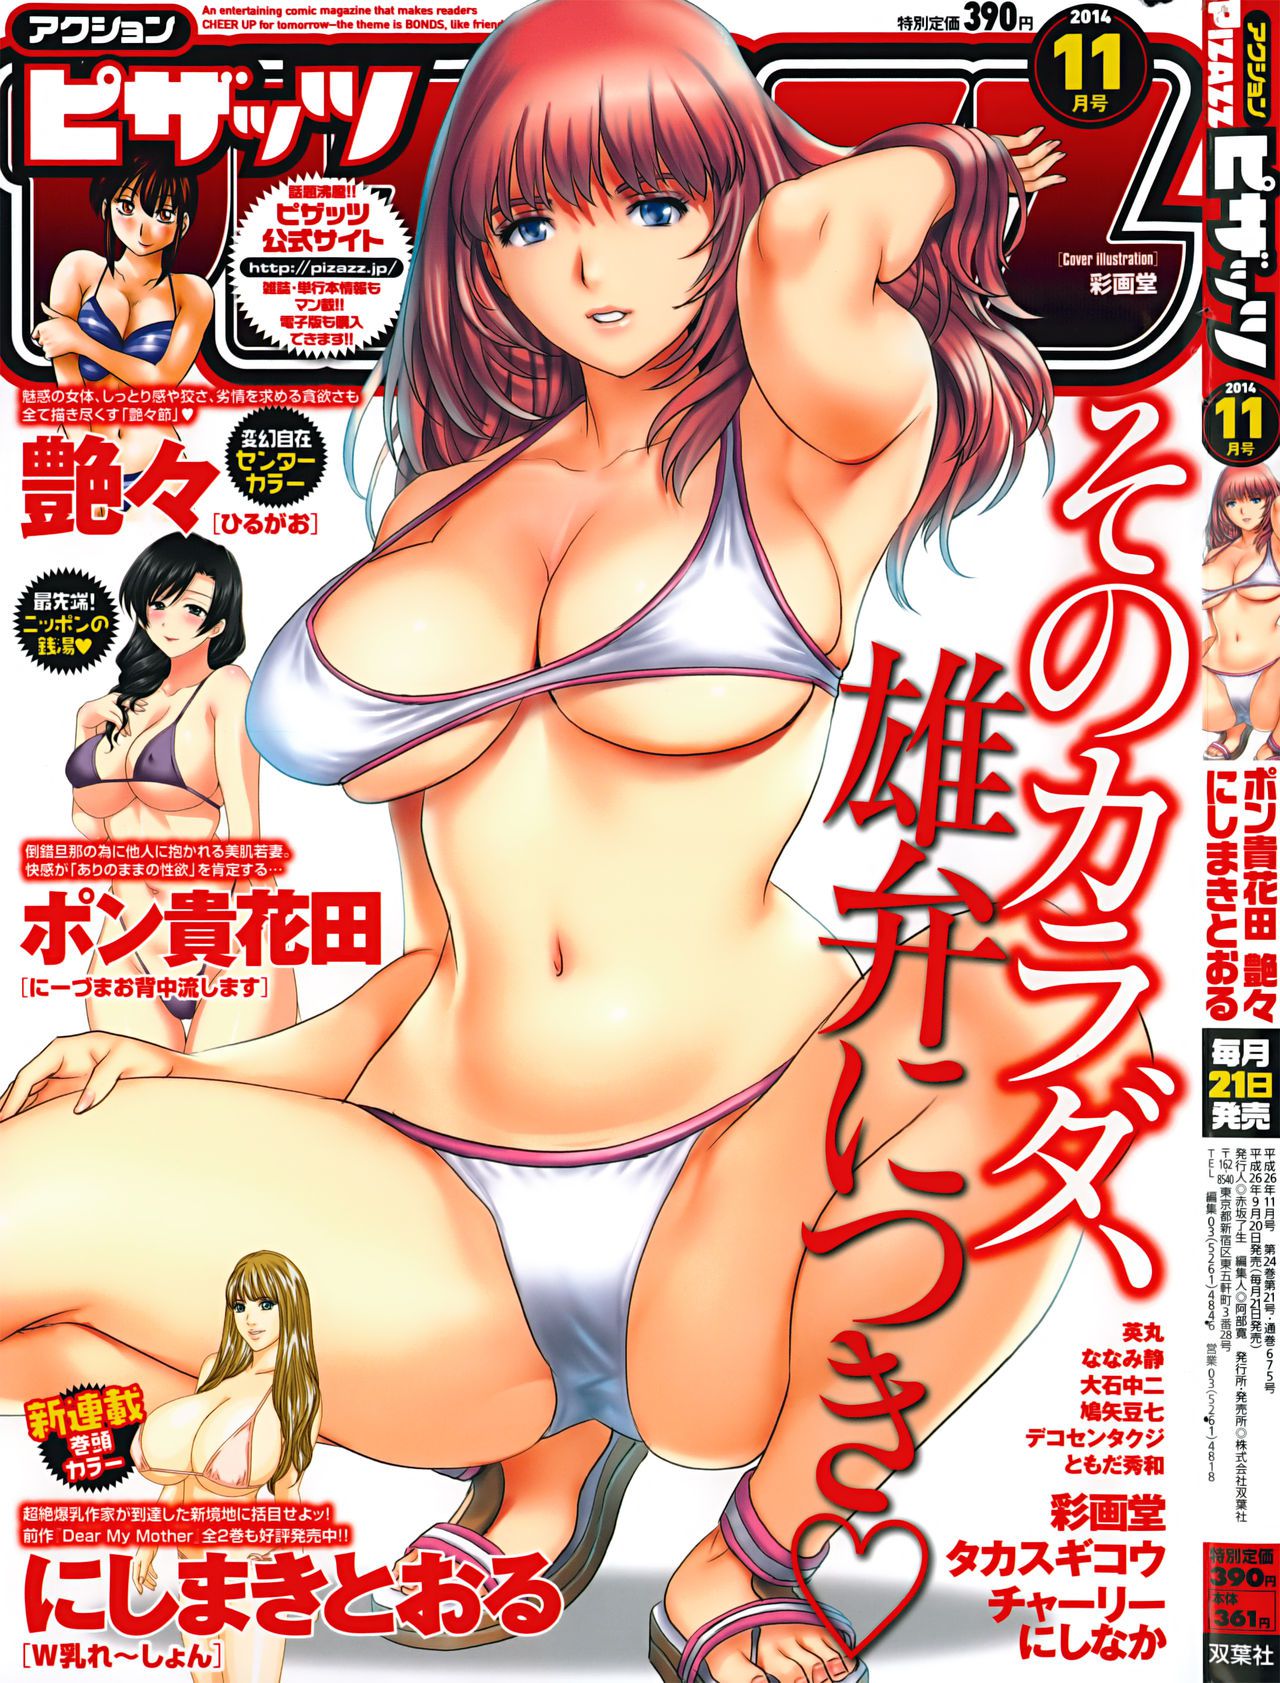 [Saigado] Cover Illustrations [彩画堂] Cover Illustrations 70